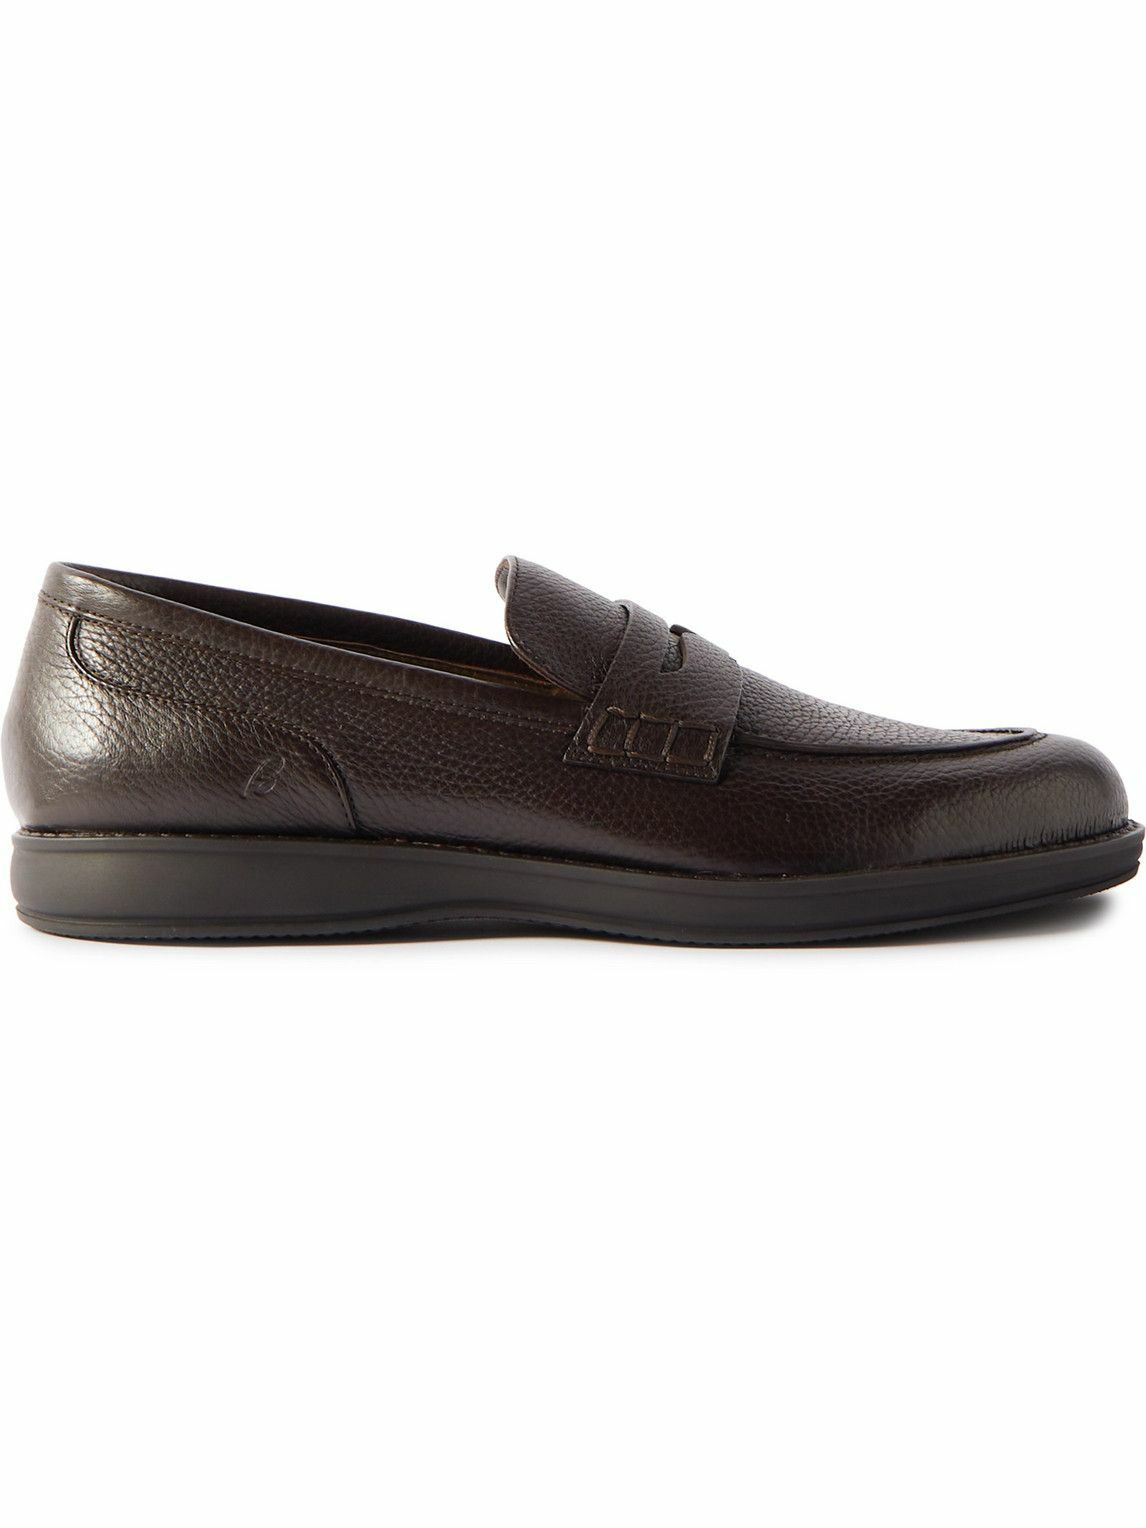 Brioni - Full-Grain Leather Penny Loafers - Brown Brioni